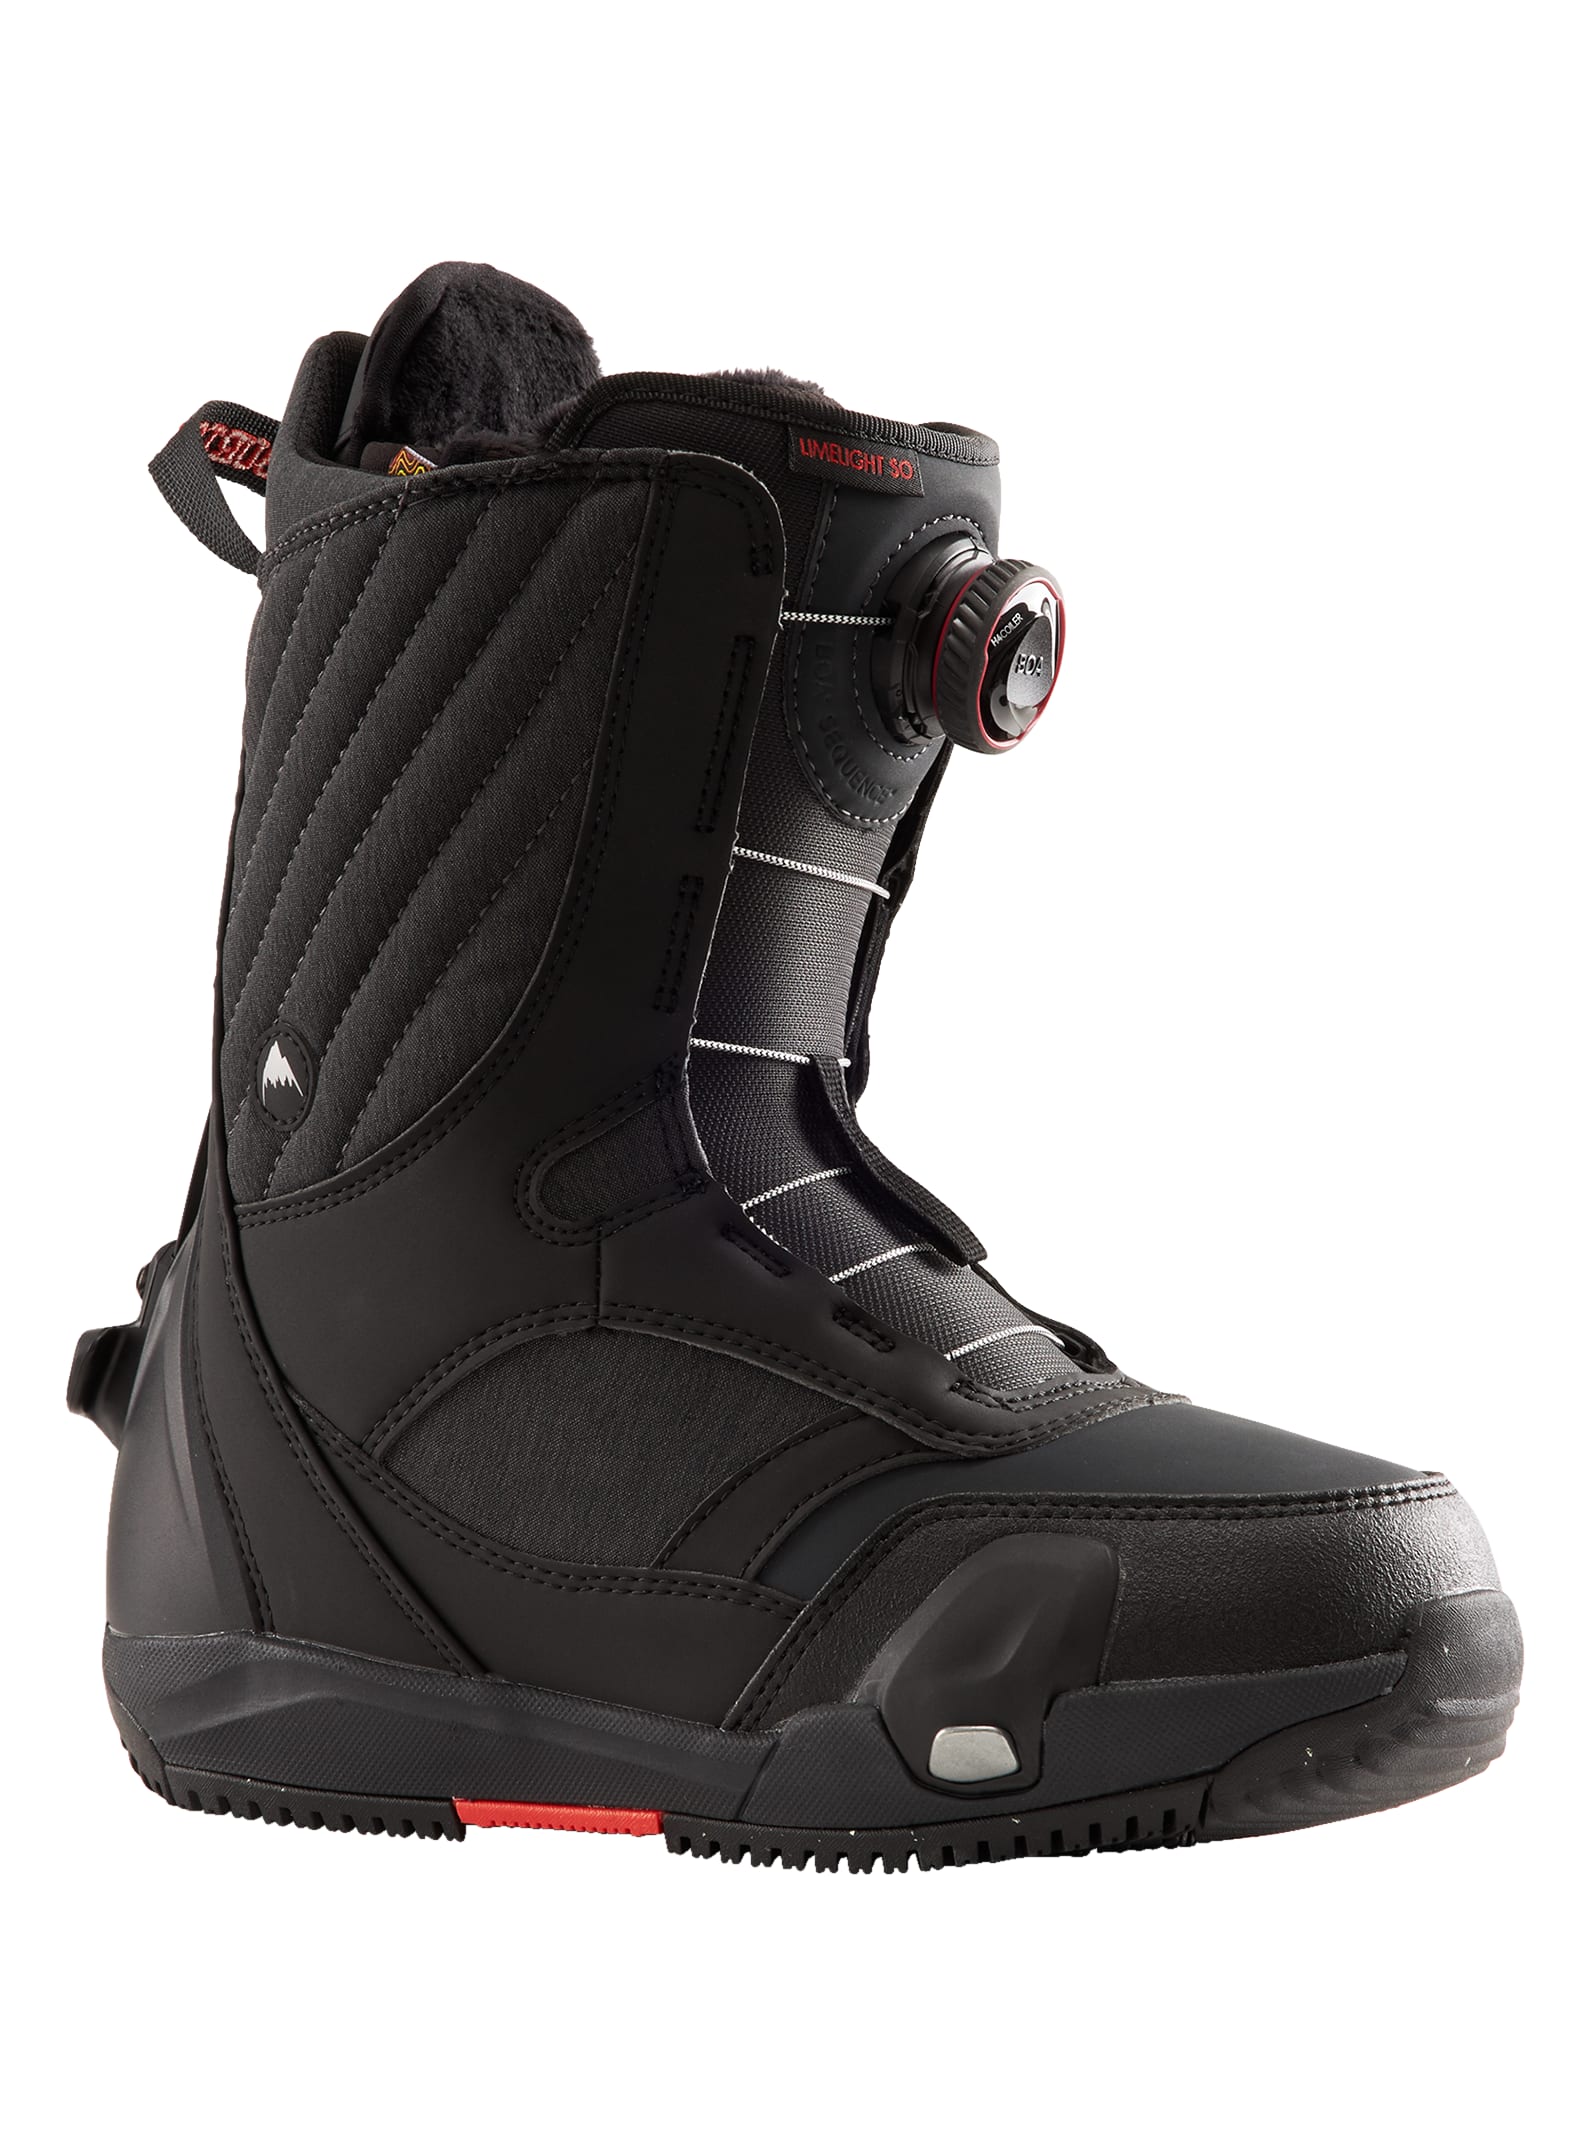 Women's Limelight Step On Snowboard Boots